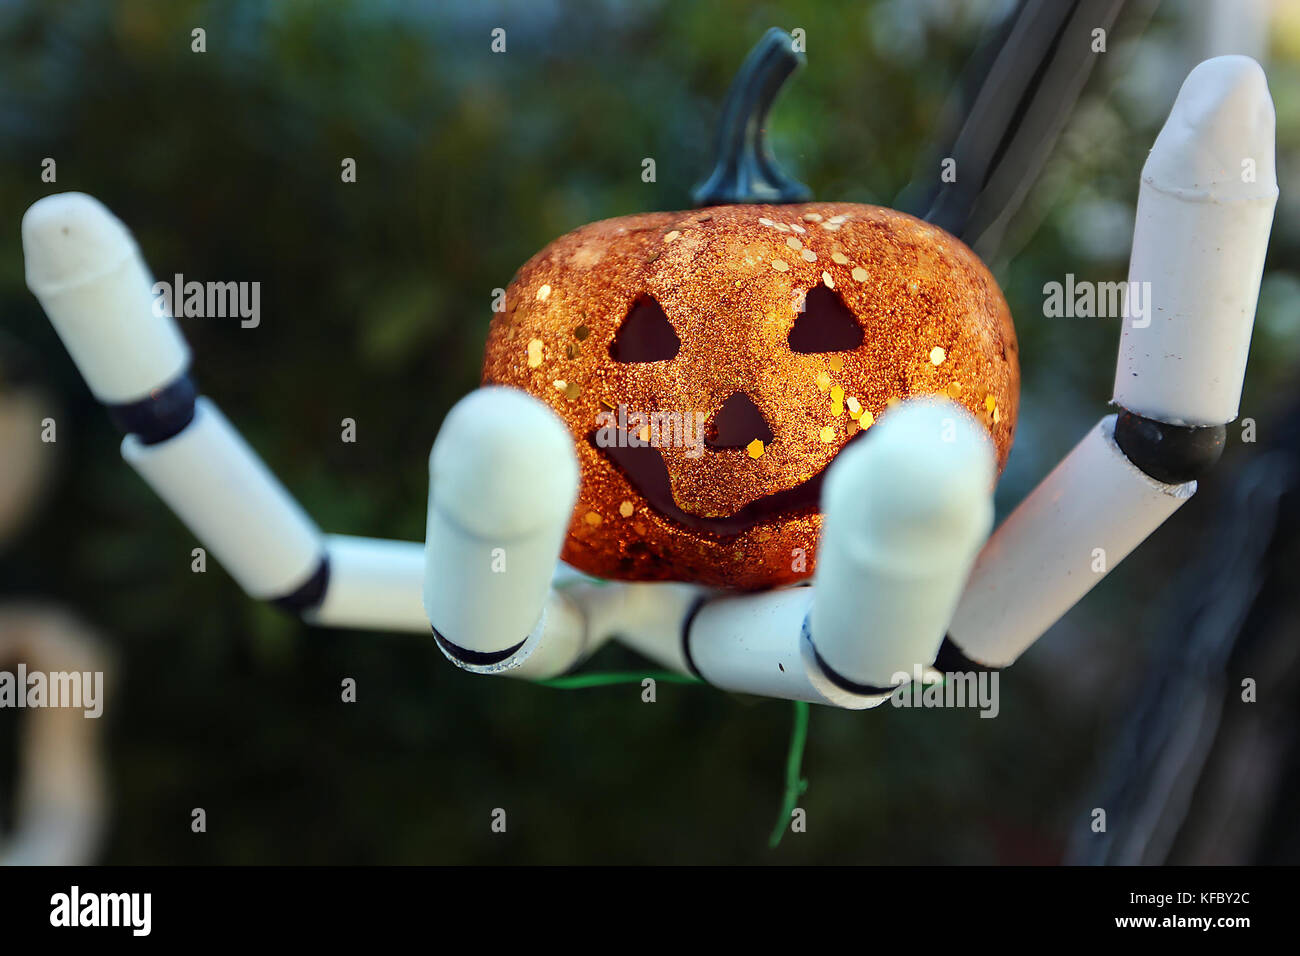 Napa, CA, USA. 26th Oct, 2017. Jack Skellington from the movie ''The Nightmare Before Christmas'' holds a jack o' lantern in the Halloween display at Jacquelyn and Bill Chambers' home. Credit: Napa Valley Register/ZUMA Wire/Alamy Live News Stock Photo